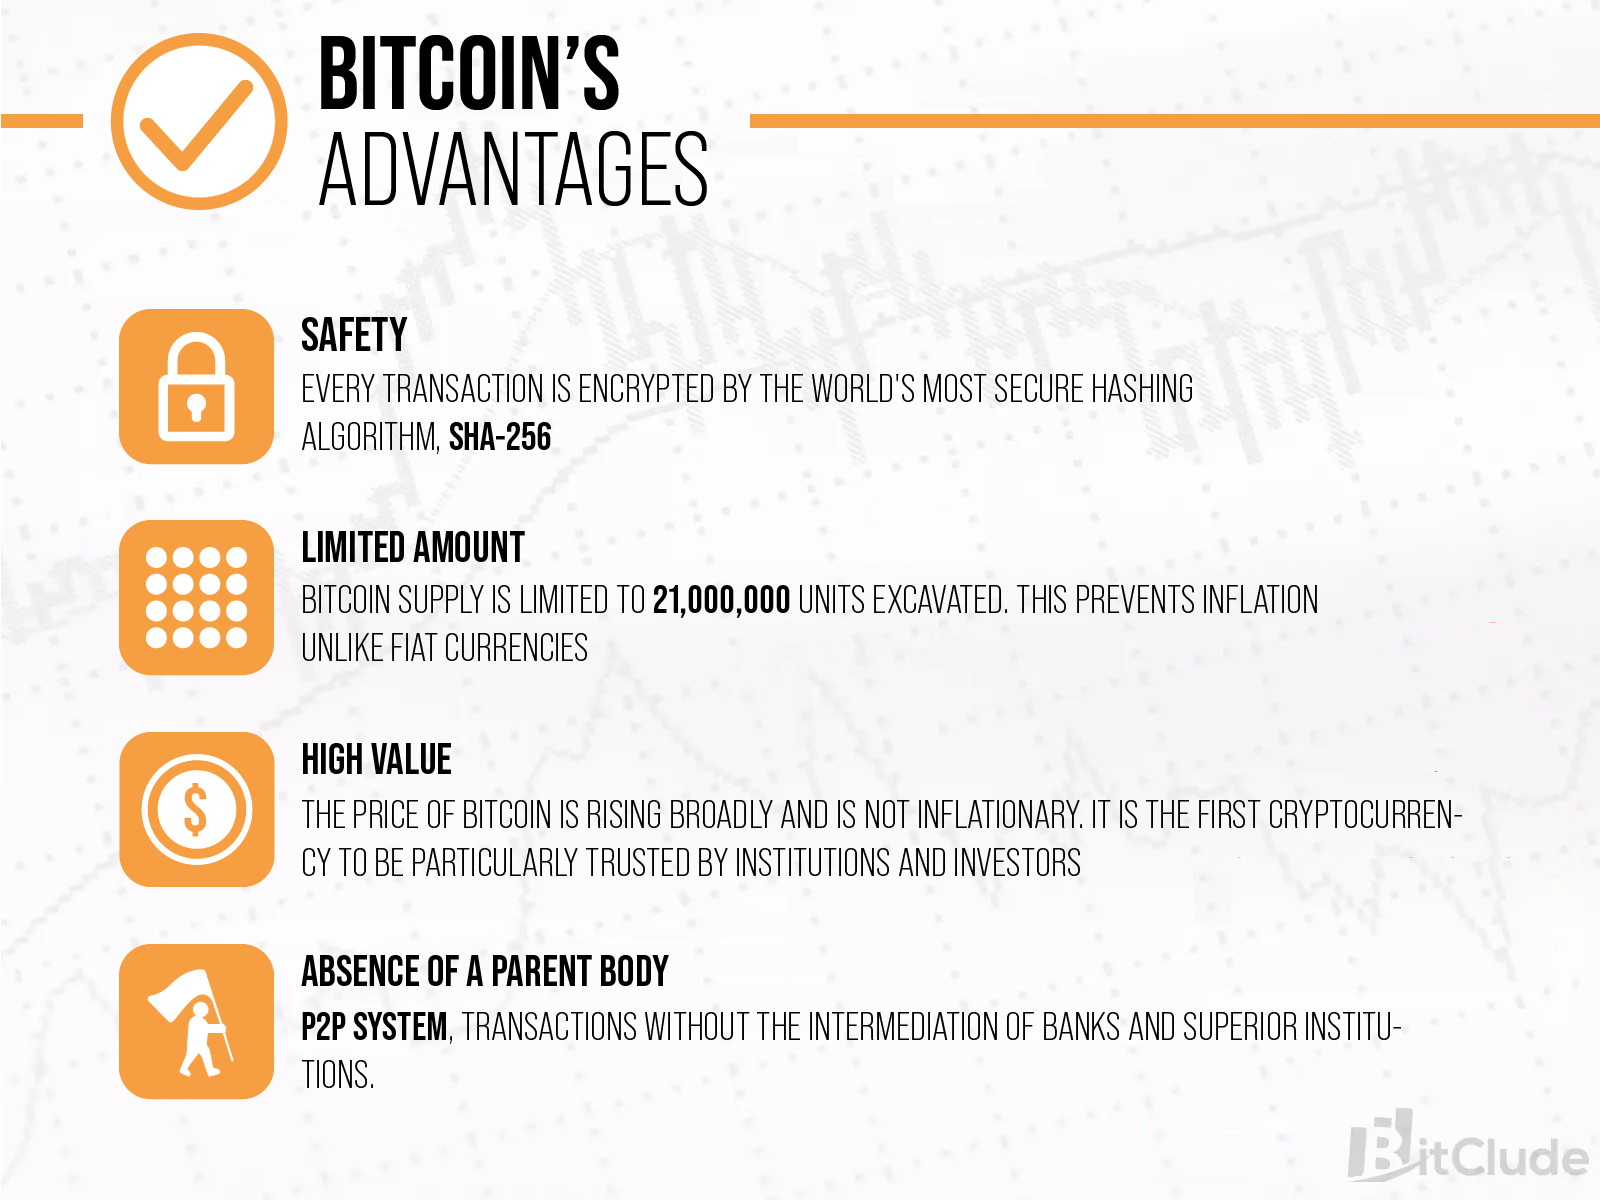 The advantages of Bitcoin are security, decentralization, and limited supply that counteracts inflation.